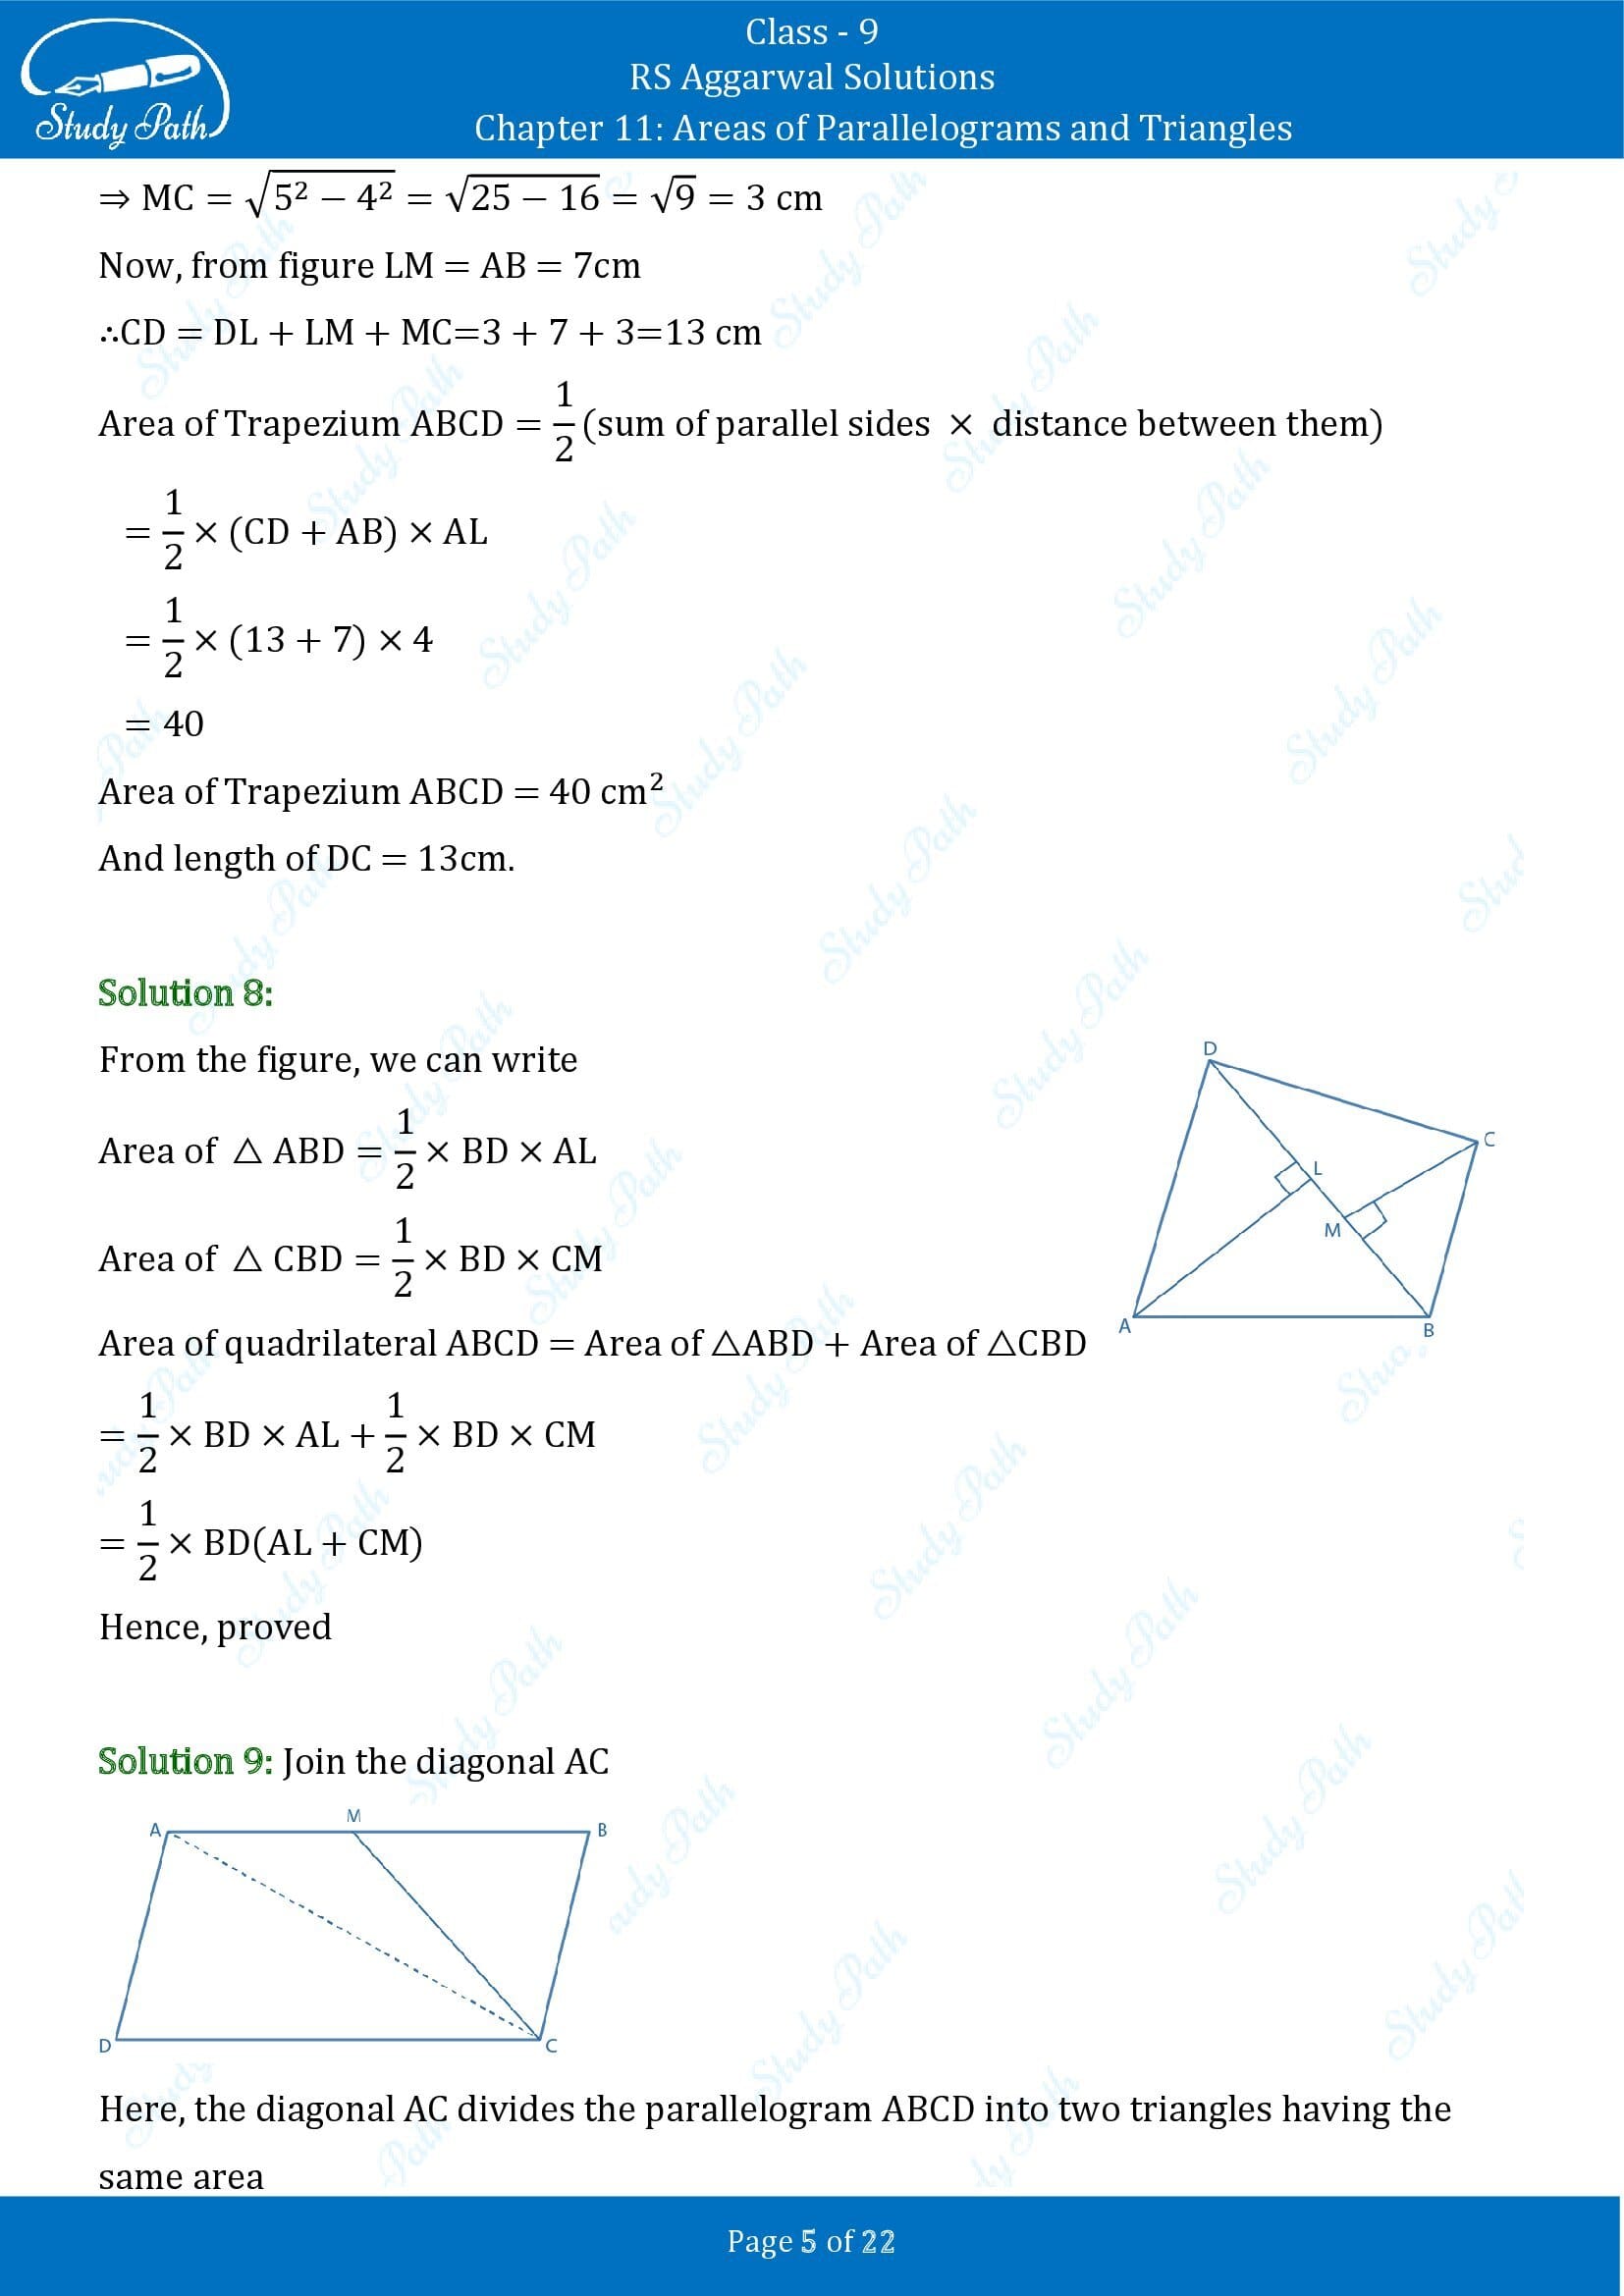 RS Aggarwal Solutions Class 9 Chapter 11 Areas of Parallelograms and Triangles Exercise 11 00005